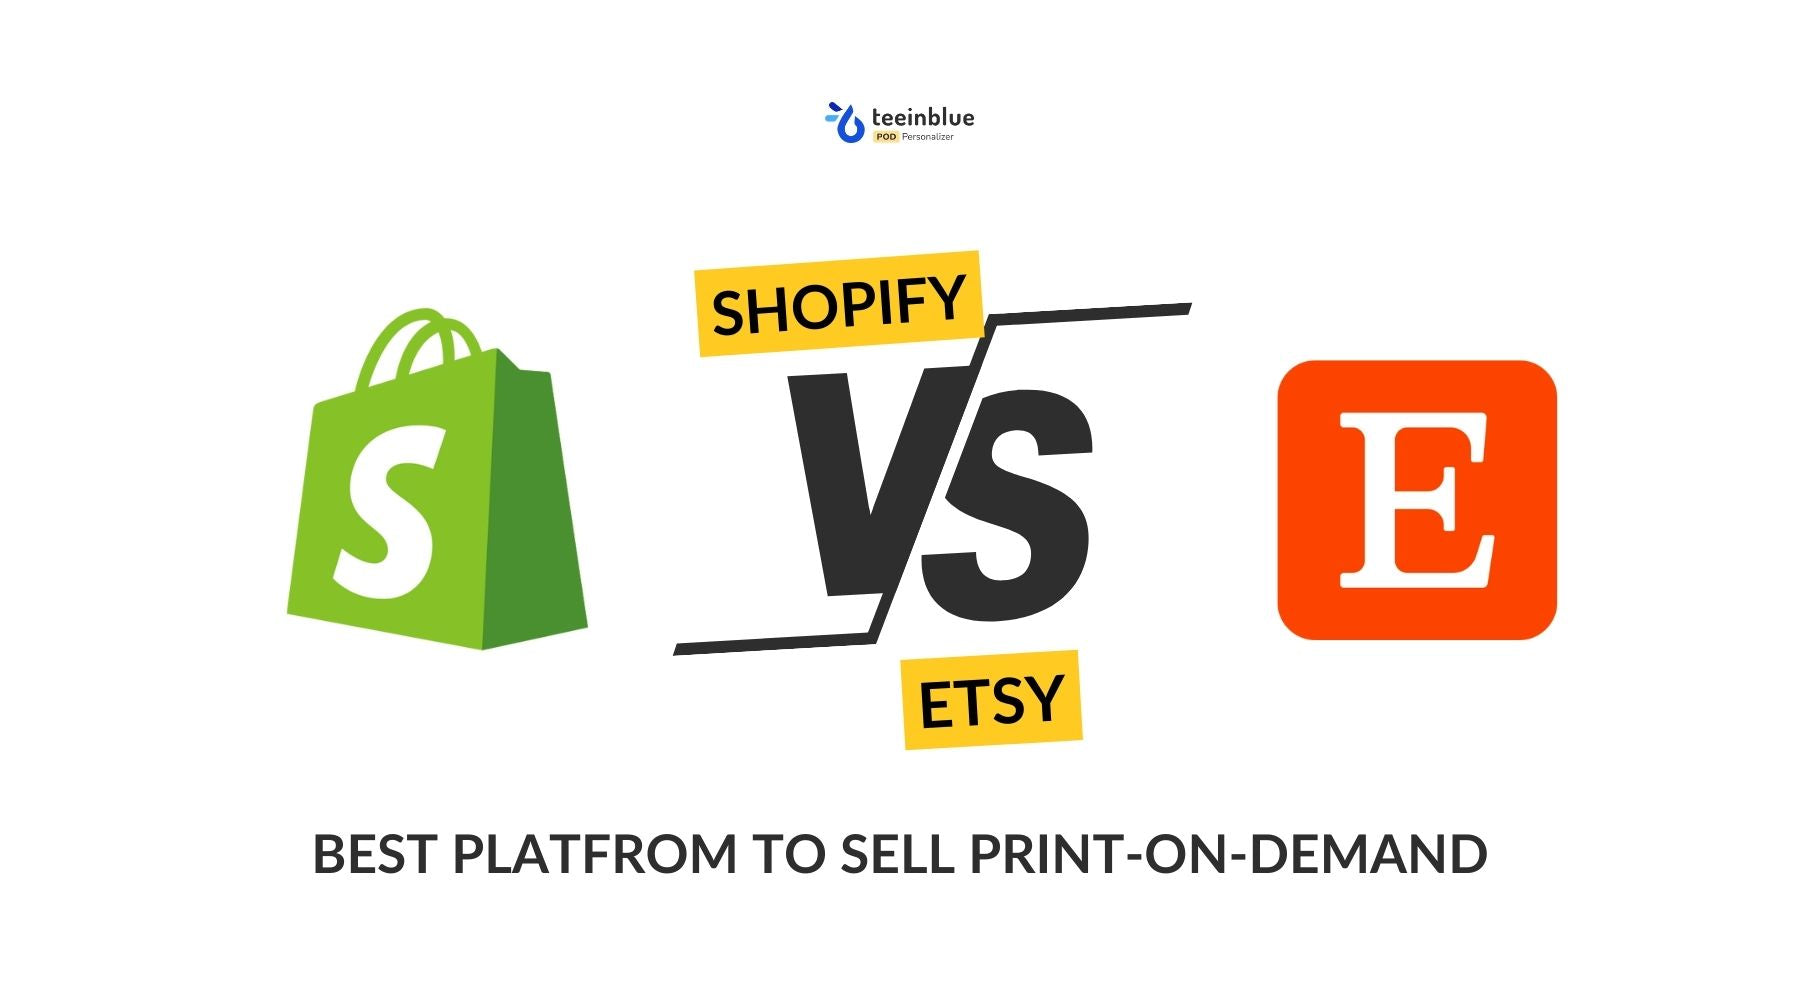 Shopify vs Etsy Which Is The Right Platform For Print-on-demand?